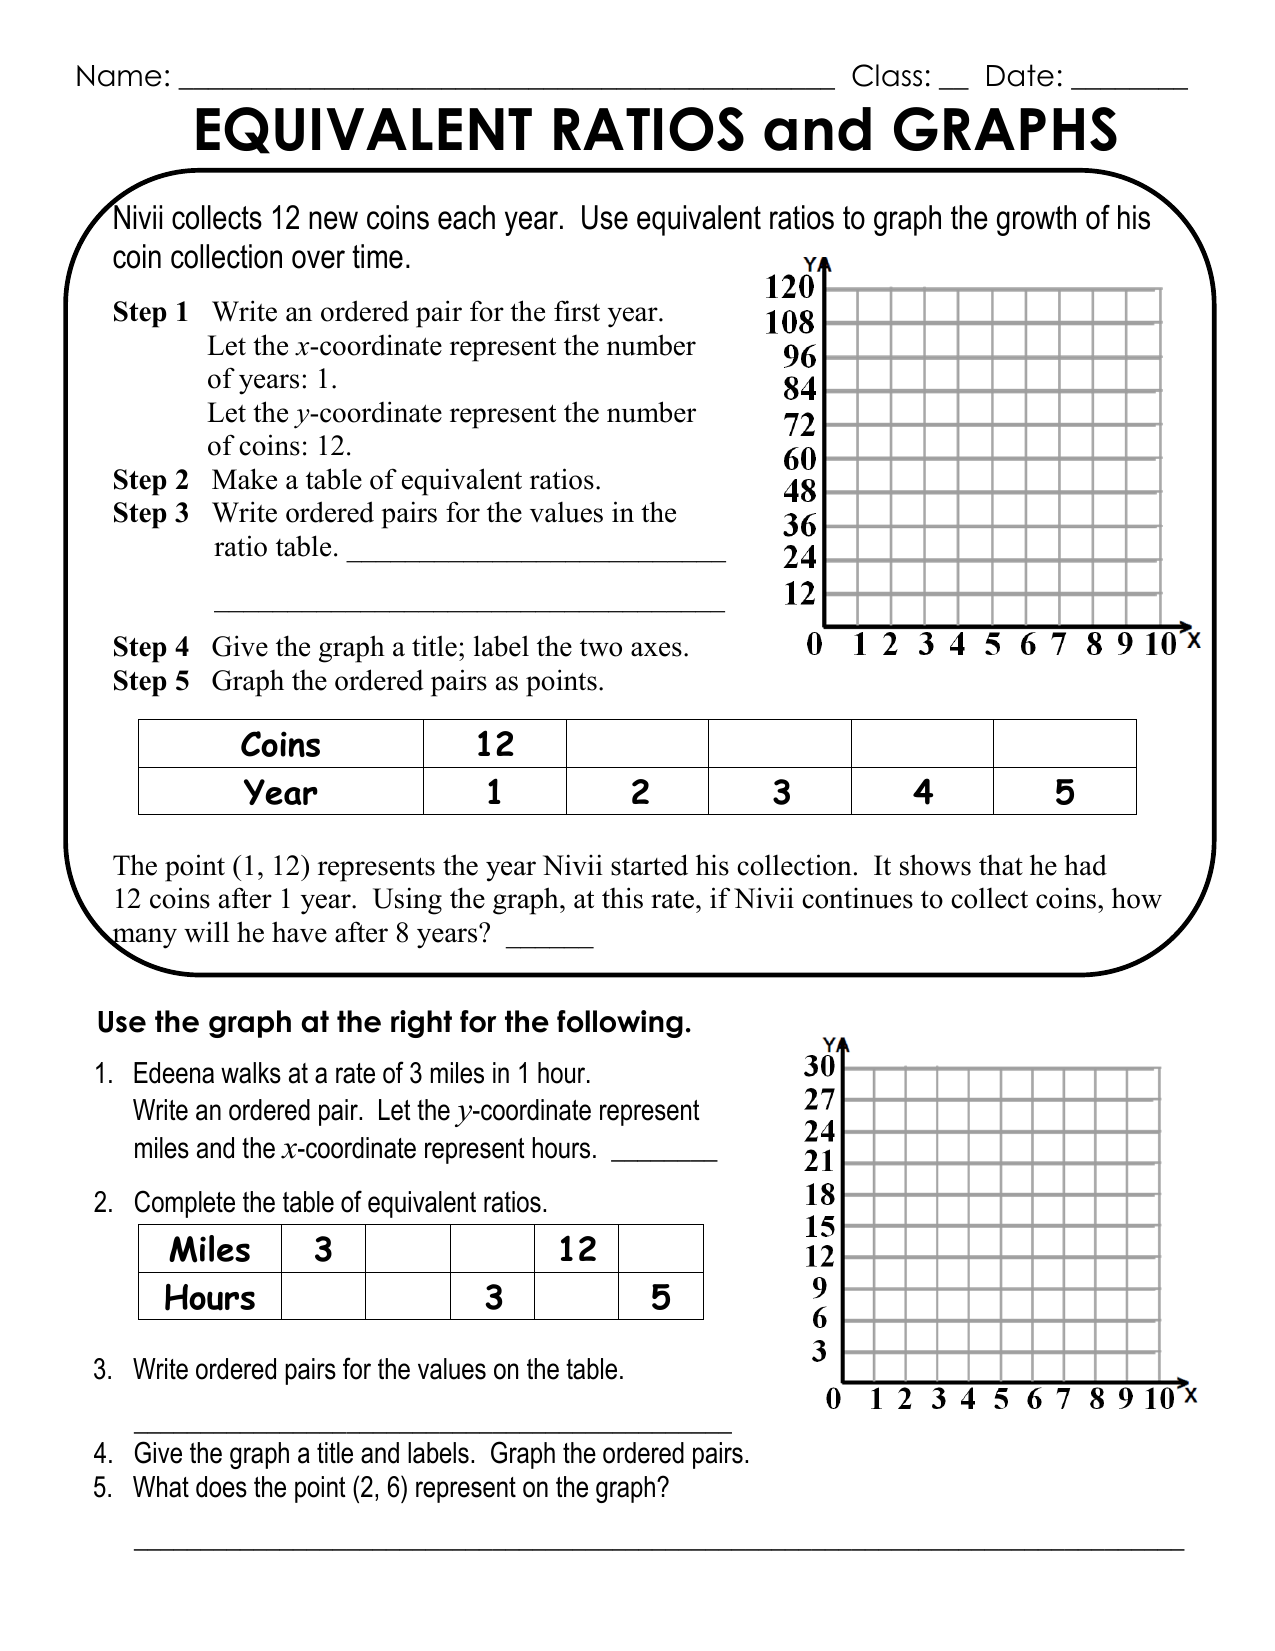 Graphing Ratios Practice Problems 28lr5g6